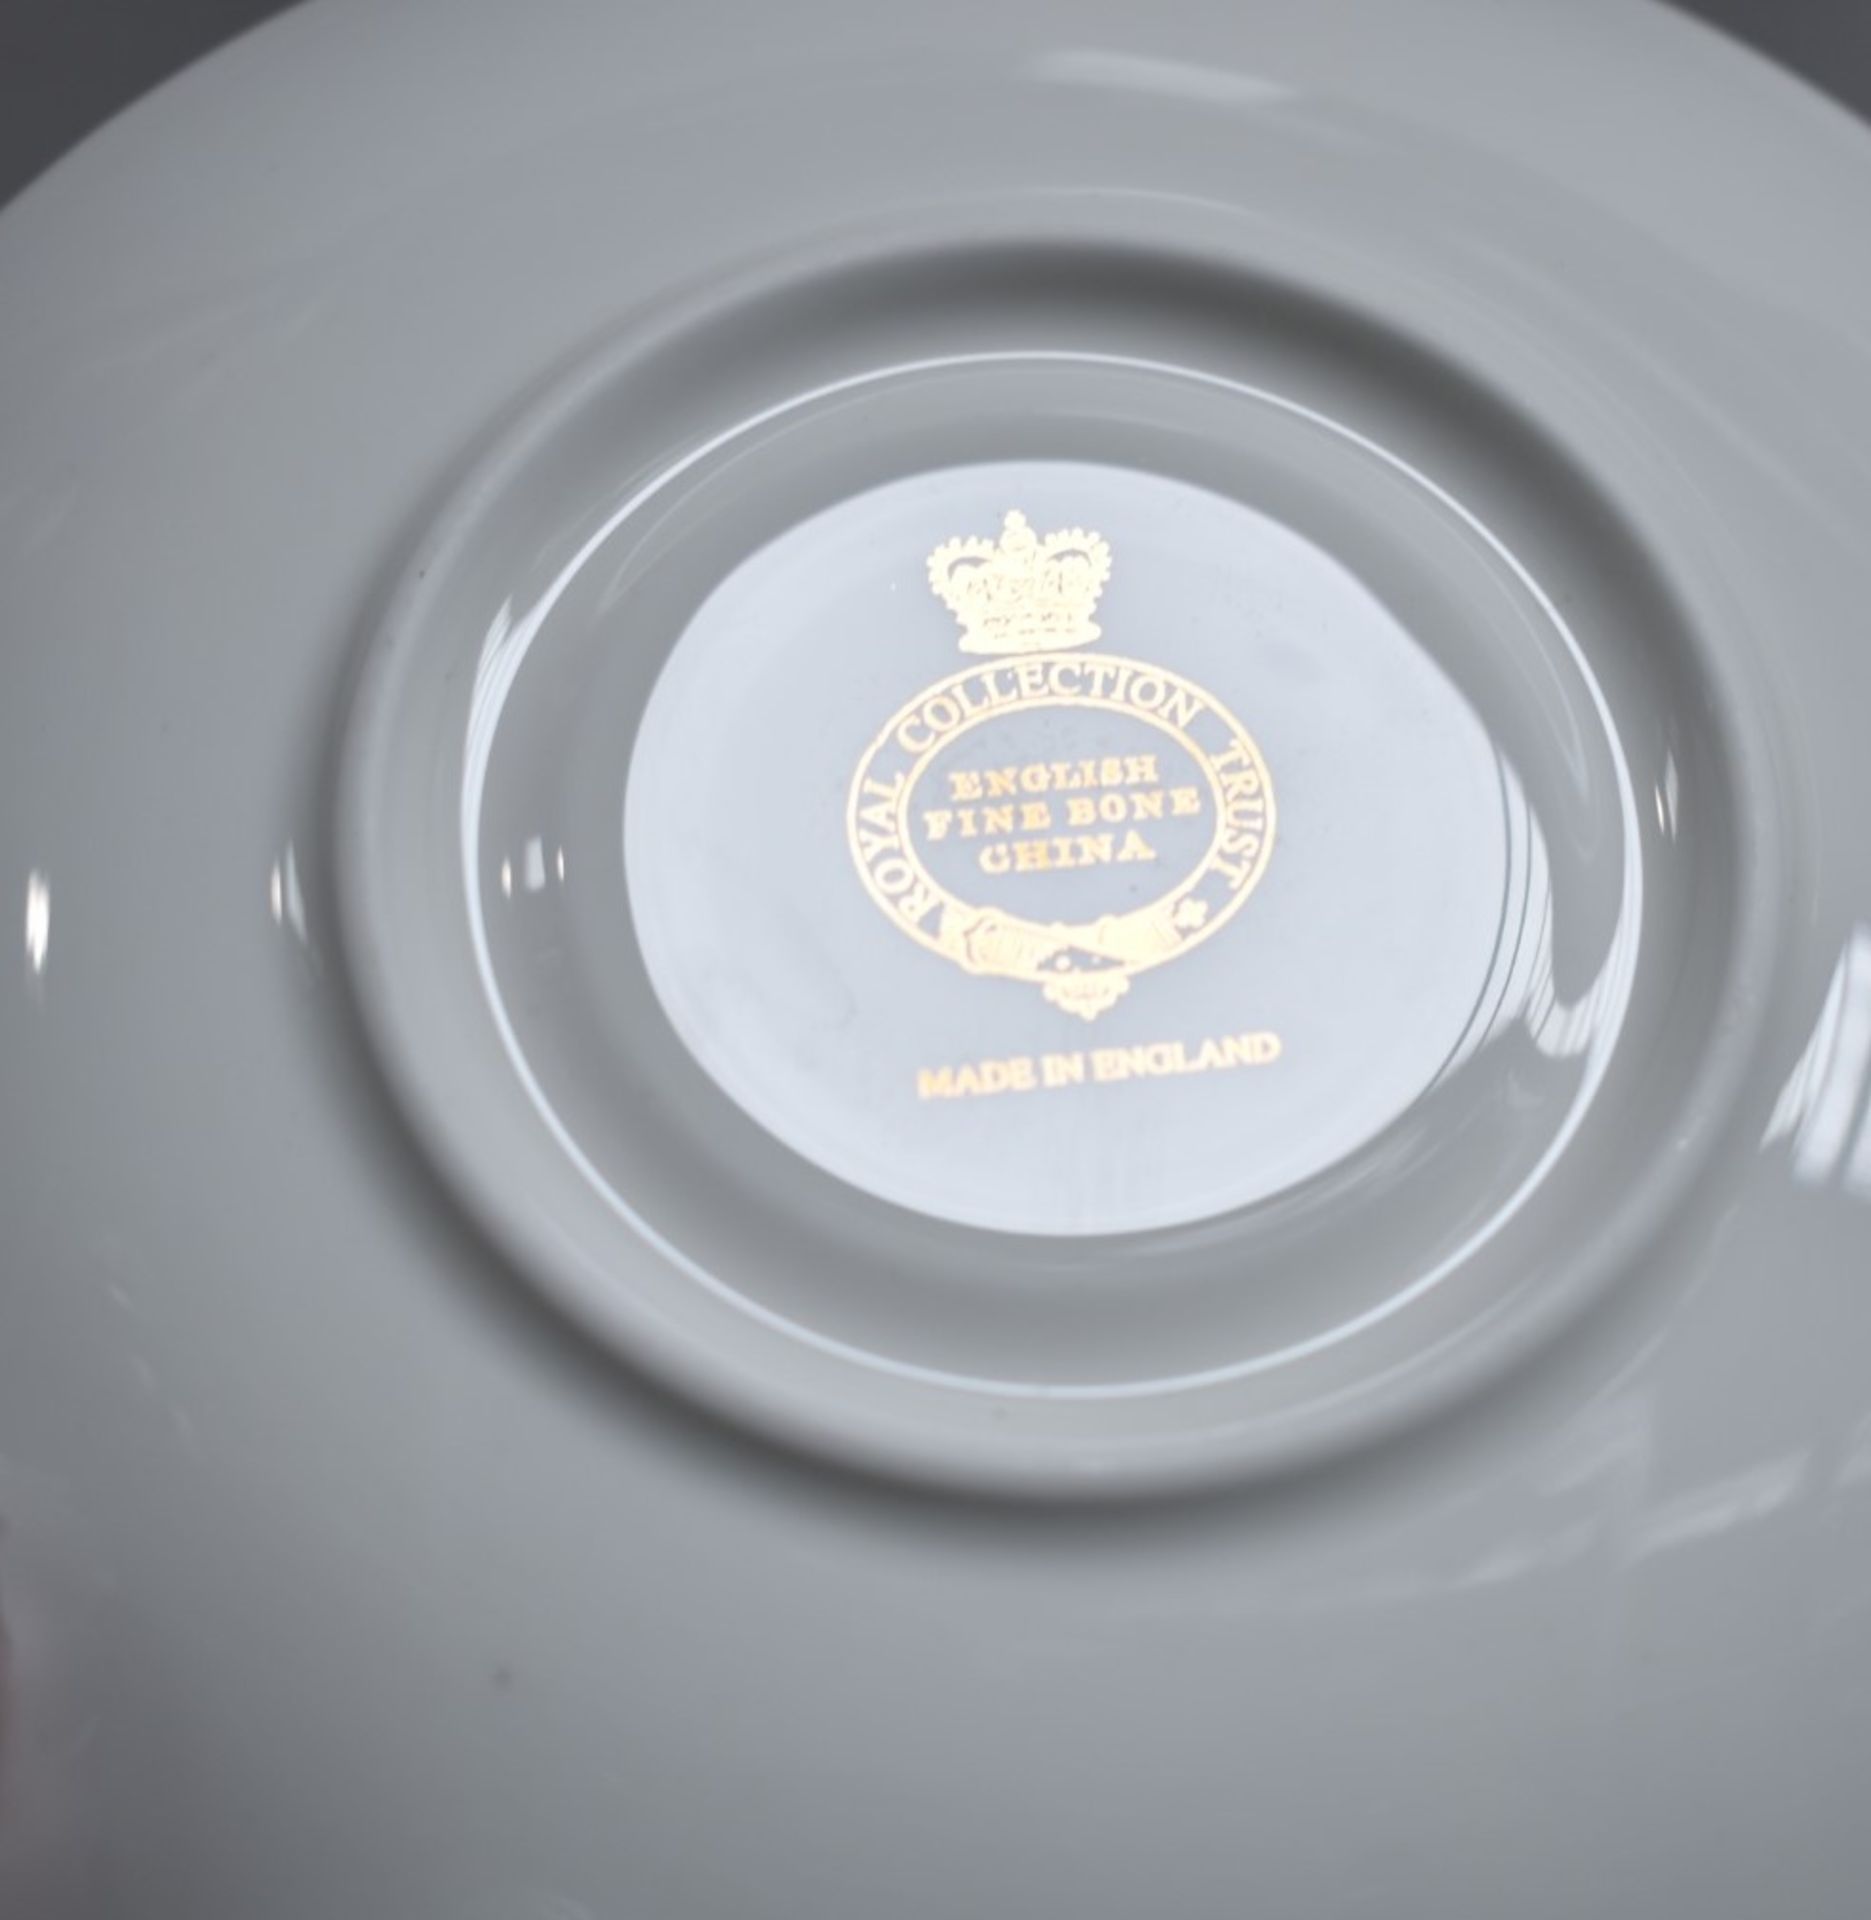 1 x ROYAL COLLECTION TRUST 'Coat of Arms' Fine Bone China Teacup and Saucer Set, Hand finished - Image 8 of 9